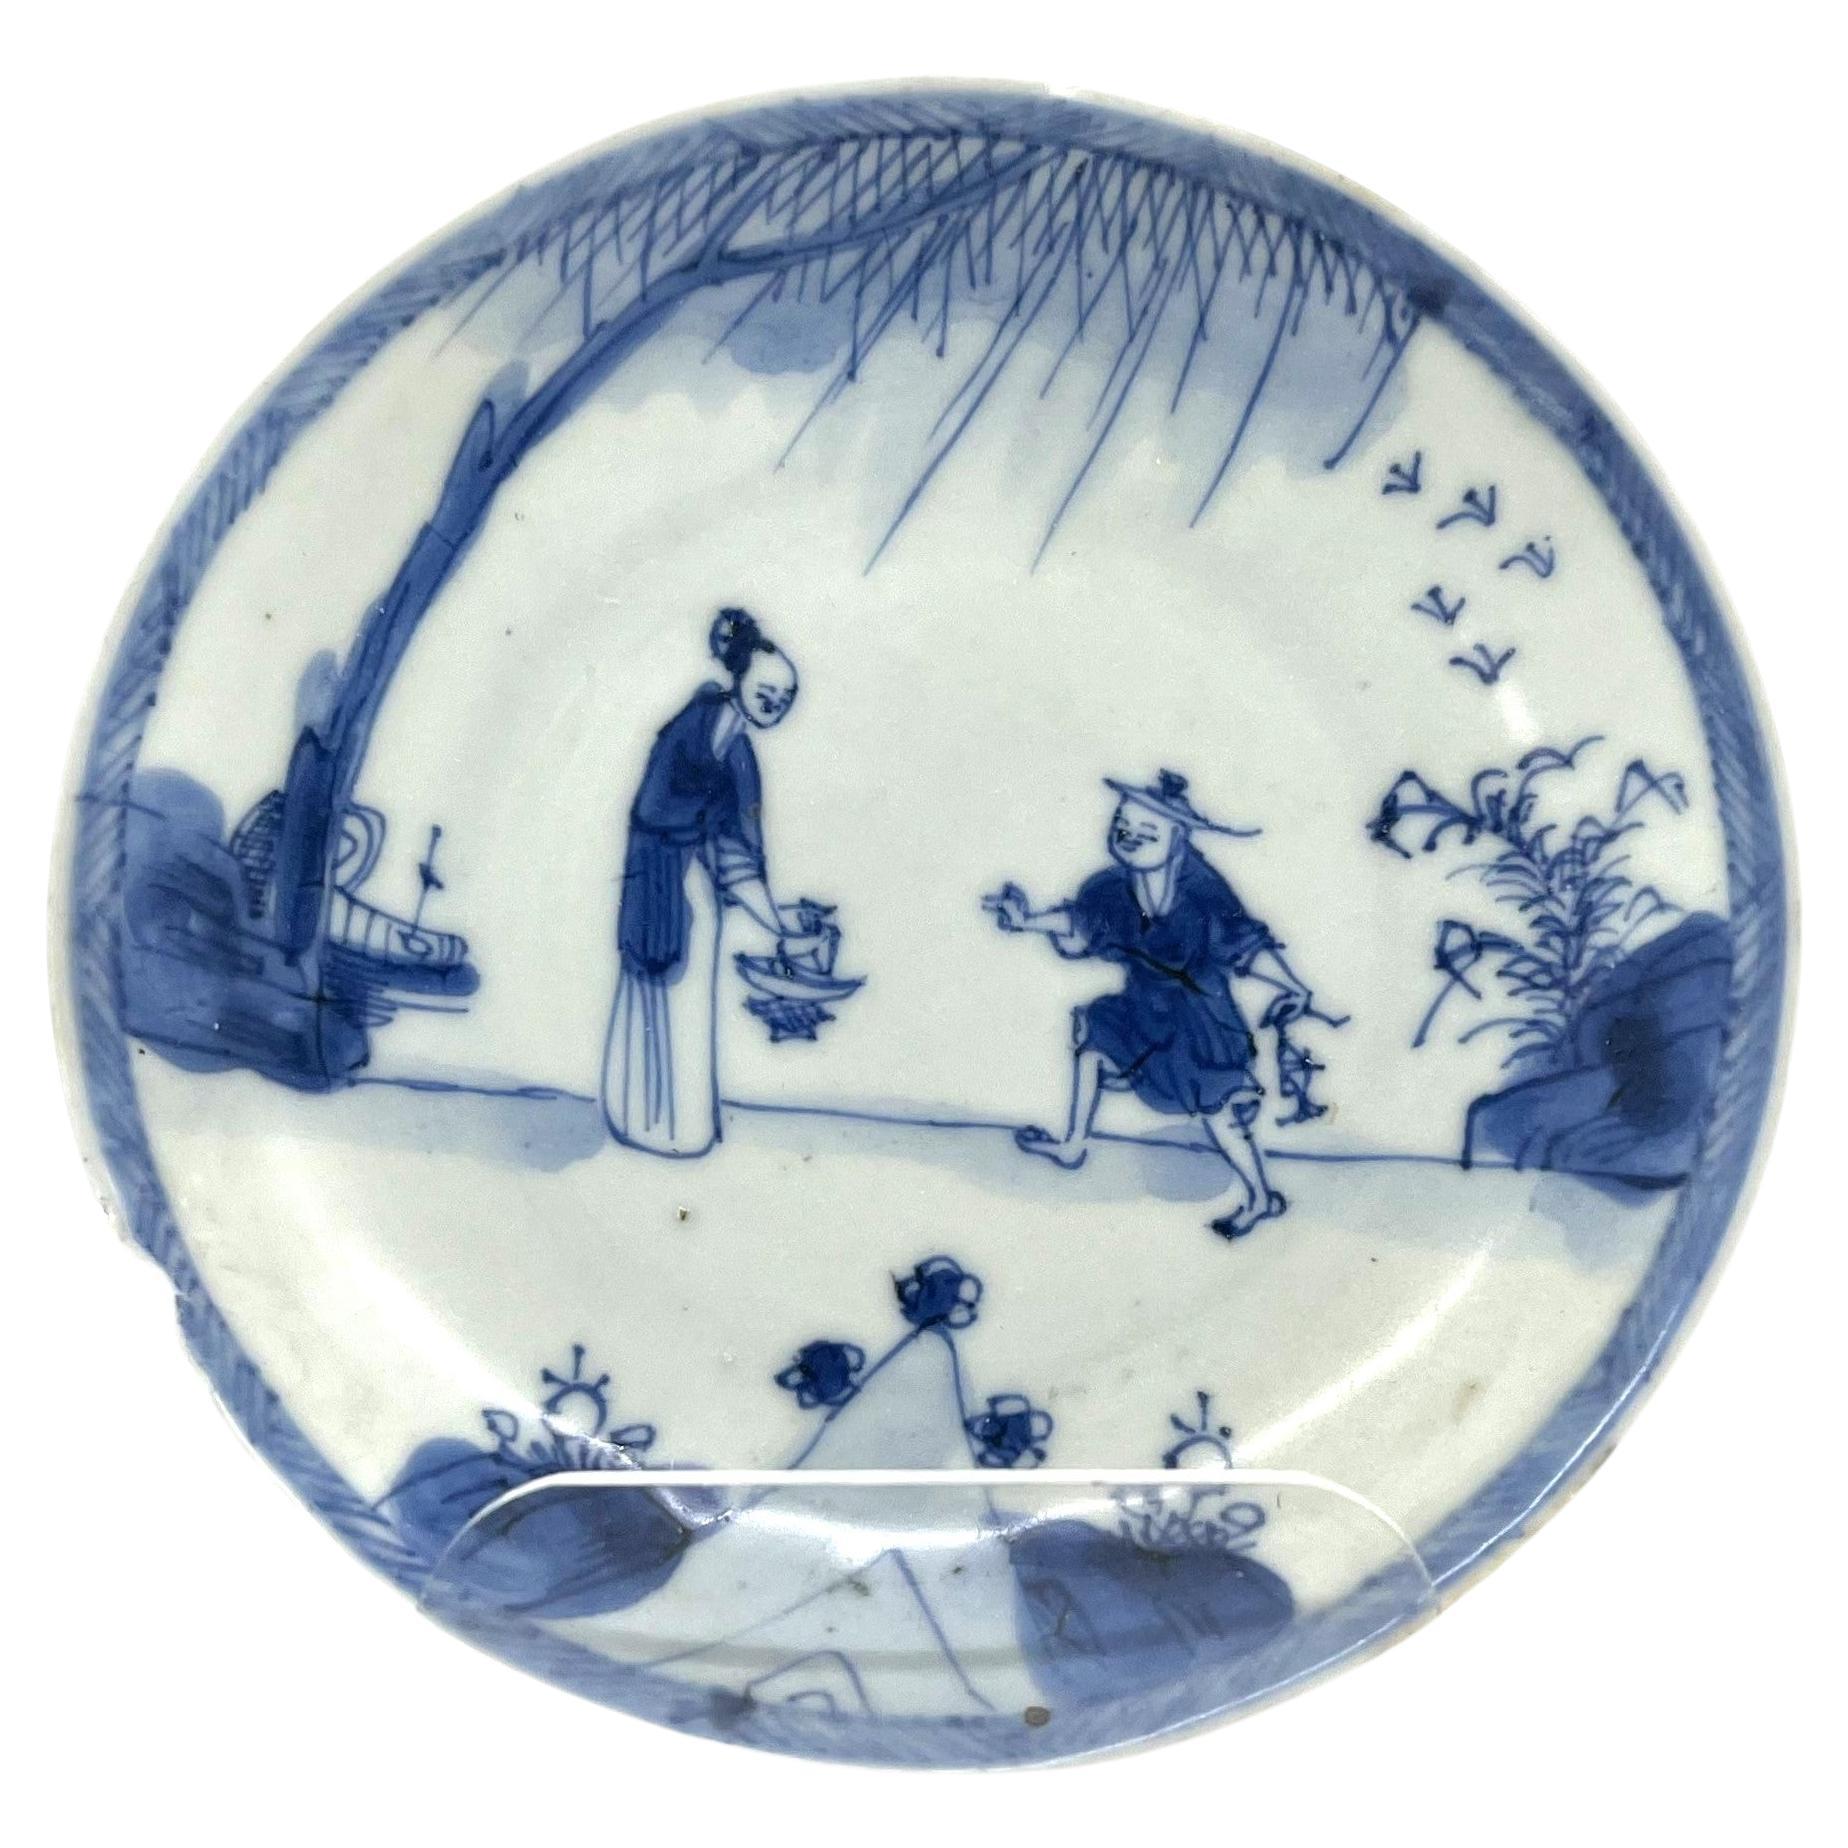 Fish Trade Blue and white saucer, circa 1725, Qing Dynasty, Yongzheng Reign